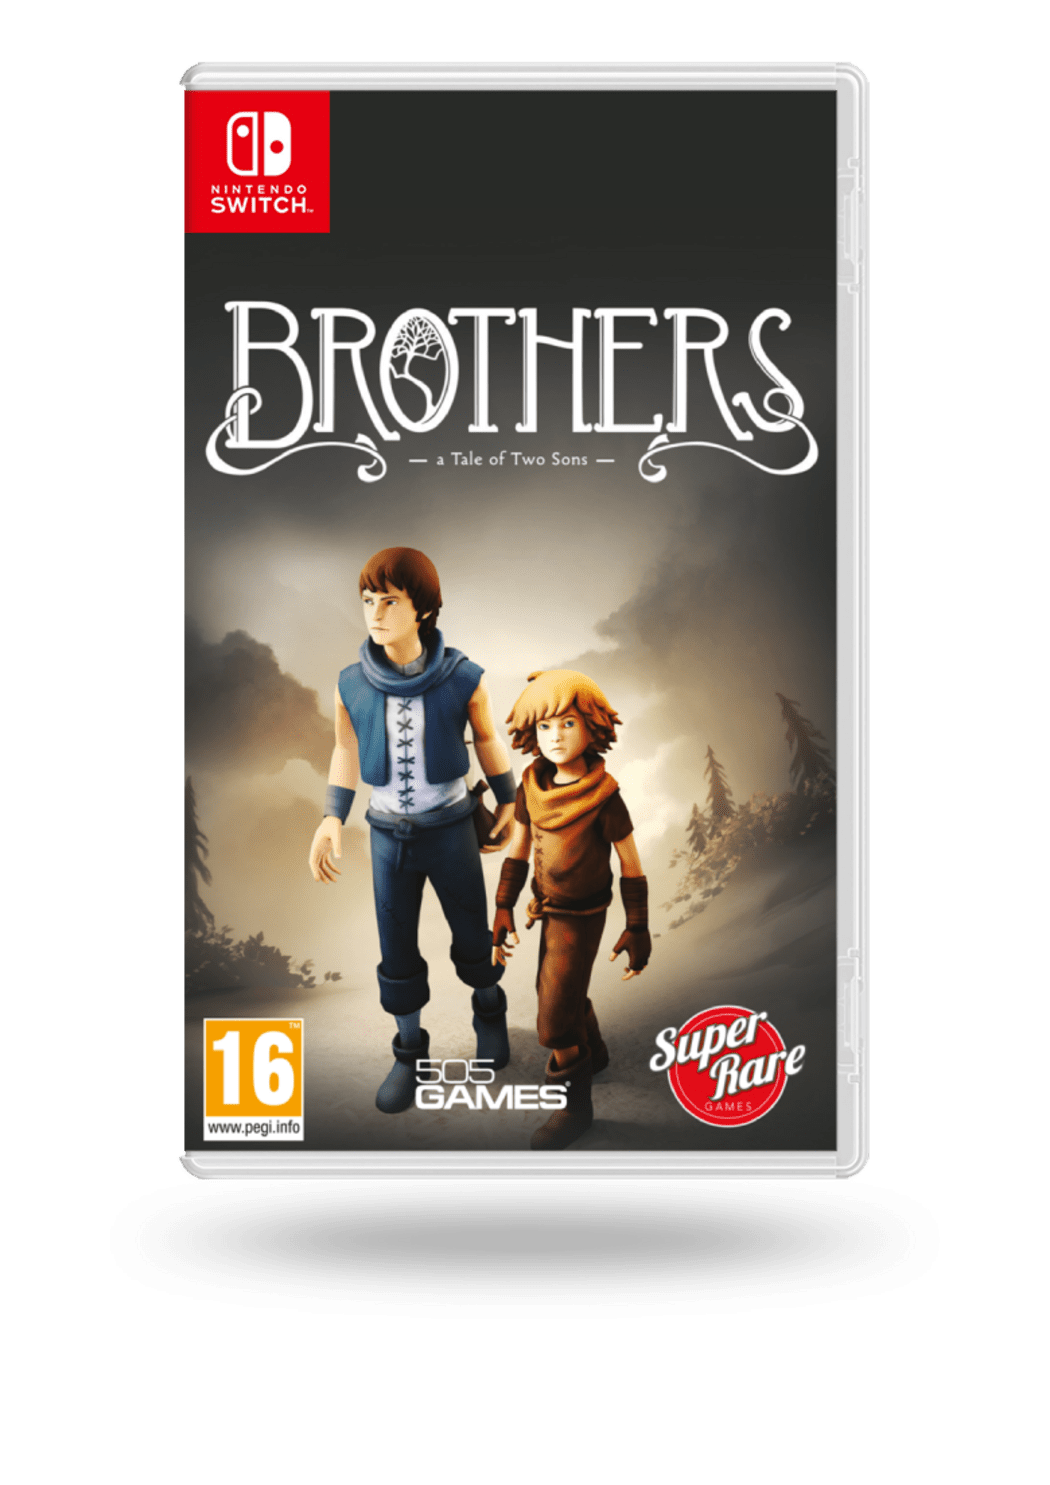 A tale of two sons ps4. Brothers a Tale of two sons ps4. Brothers: a Tale of two sons обложка. Обложка игры brothers a Tale of two sons. Brothers: a Tale of two sons Remake обложка.